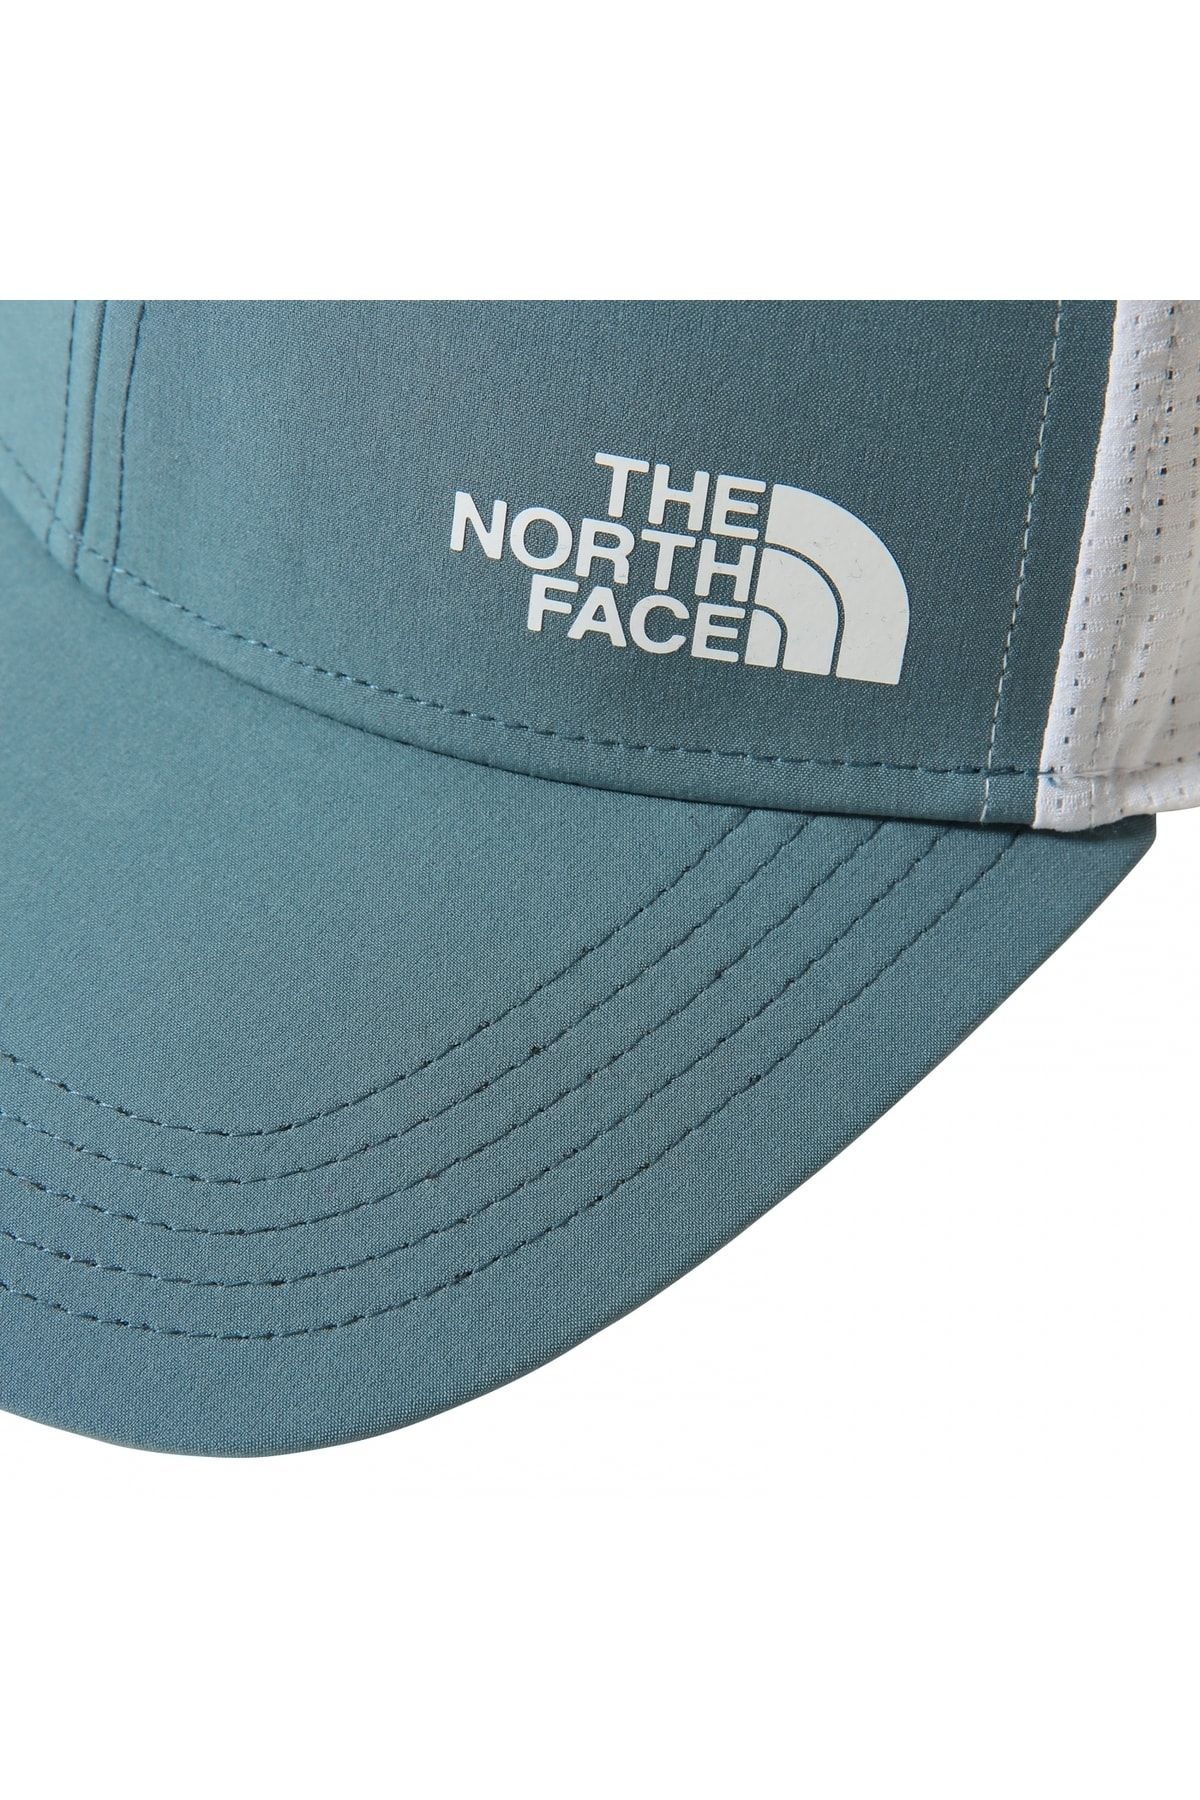 The North Face Trail Trucker 2.0 Blue Unisex HAT-NF0A5FY2A9L1